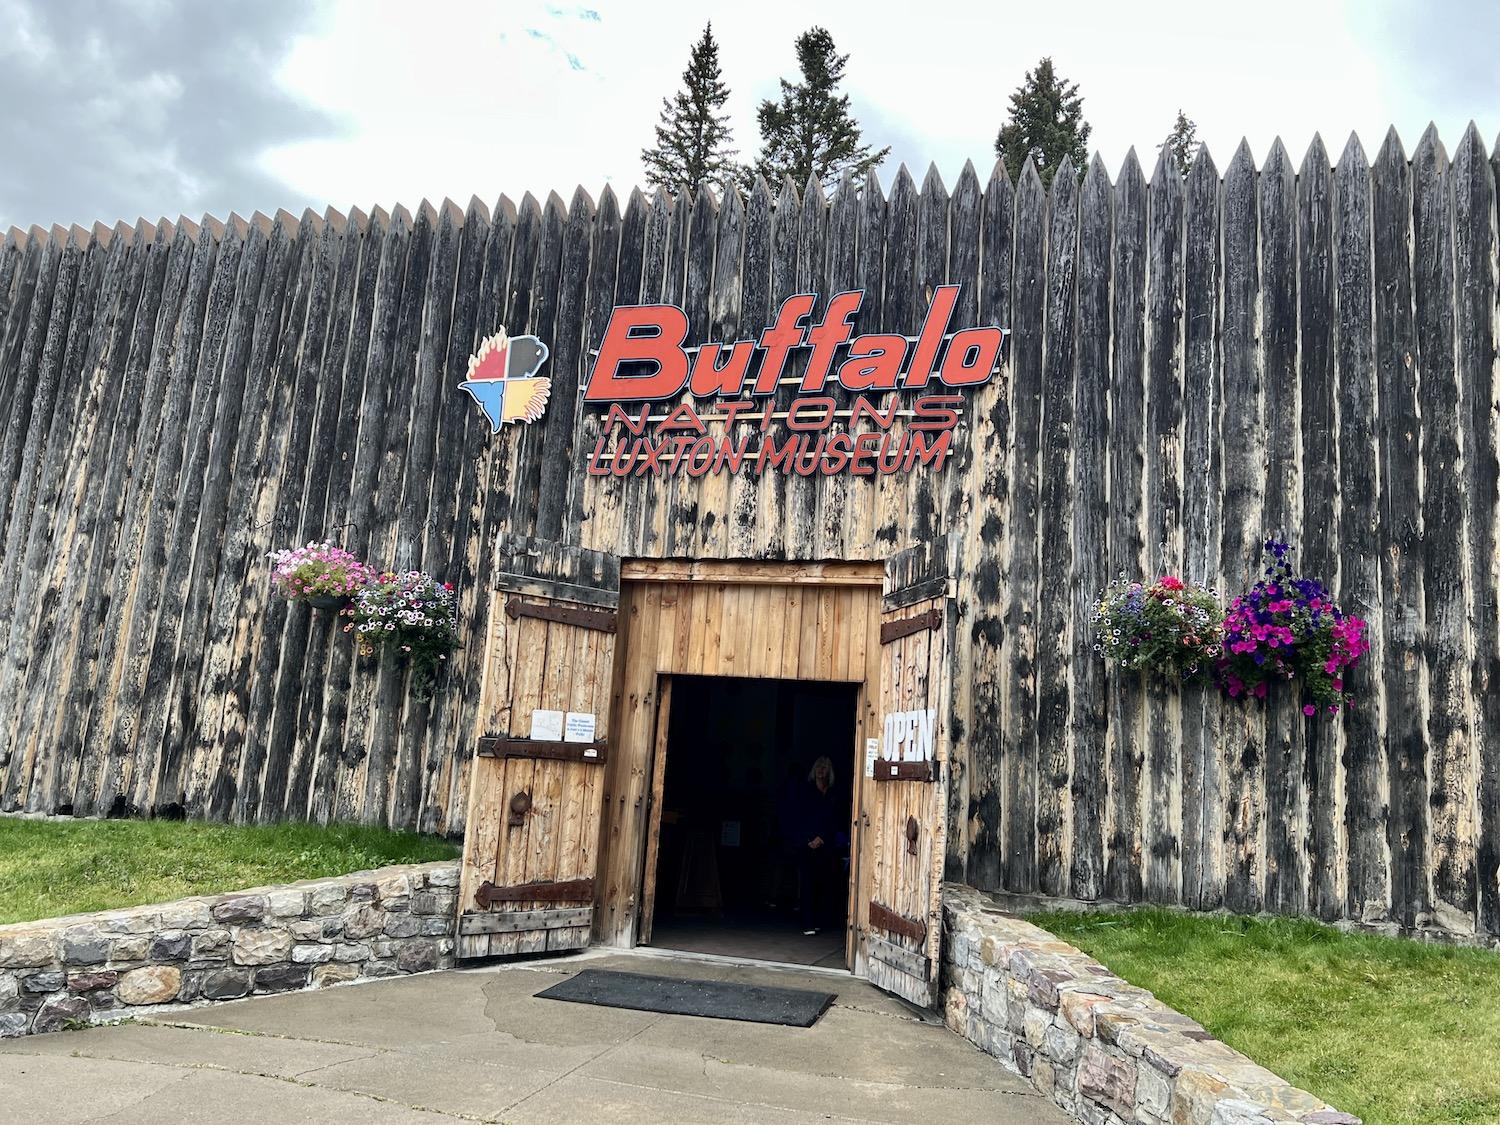 The Buffalo Nations Museum in Banff tells important stories about the historical and modern Indigenous presence in the area.